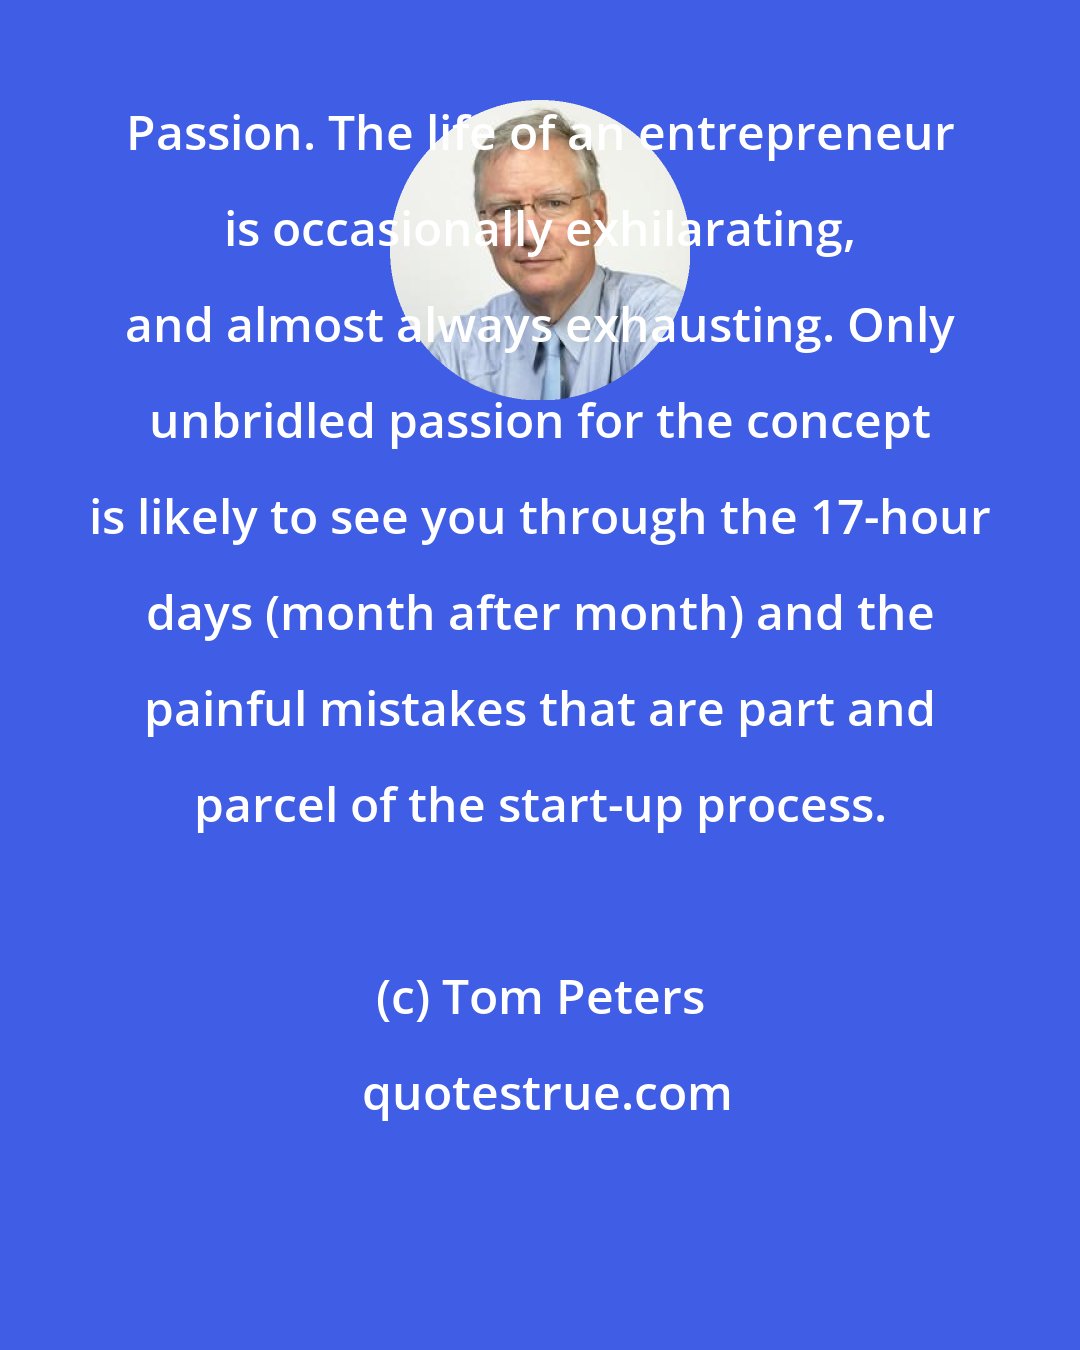 Tom Peters: Passion. The life of an entrepreneur is occasionally exhilarating, and almost always exhausting. Only unbridled passion for the concept is likely to see you through the 17-hour days (month after month) and the painful mistakes that are part and parcel of the start-up process.